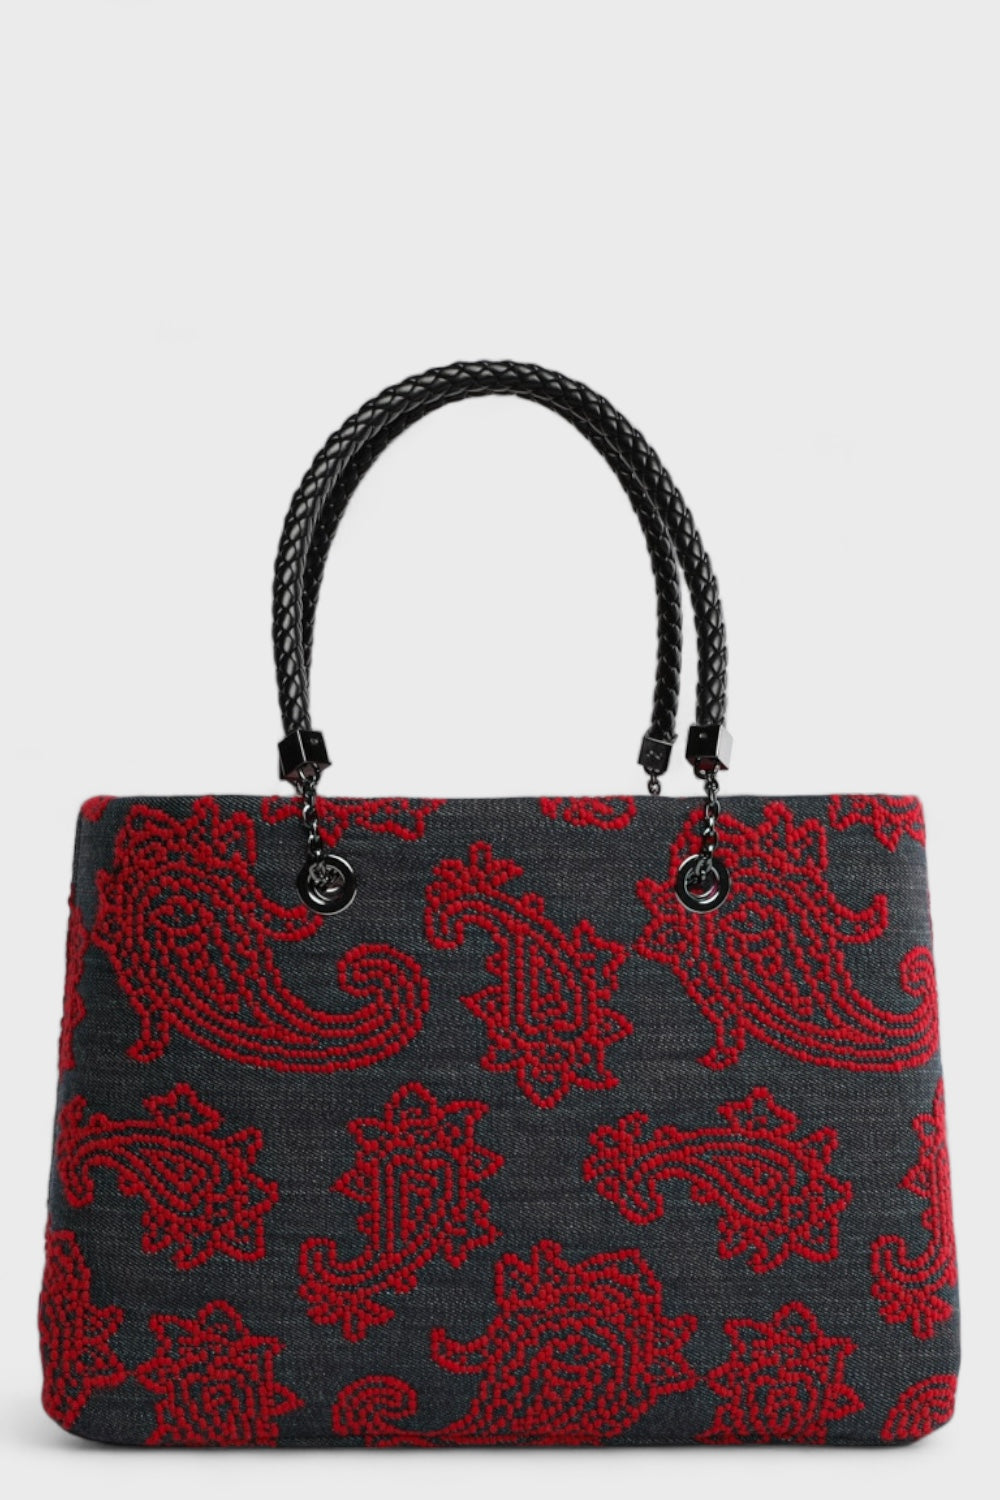 Abree Red Embroidery Denim Interchangeable Tote Bag  by TailorYourChoiceS Italian Women's Fashion Bags